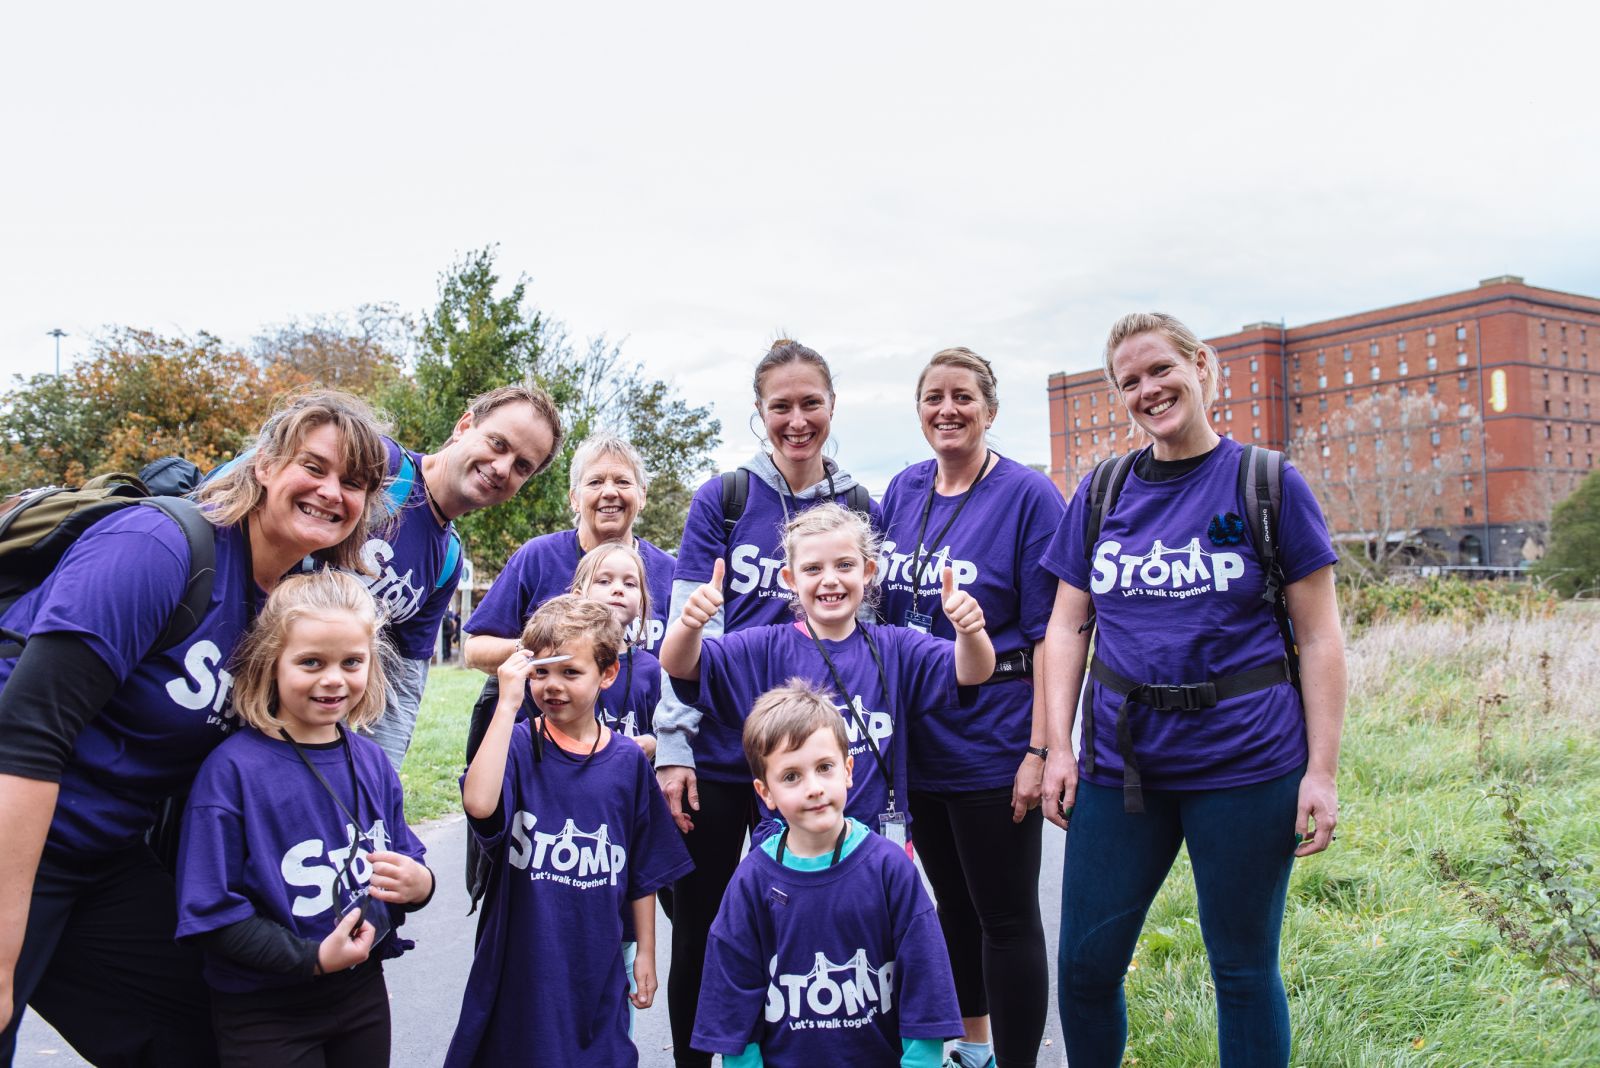 Heidi and friends took part in the 2018 Stomp with Penny Brohn UK.